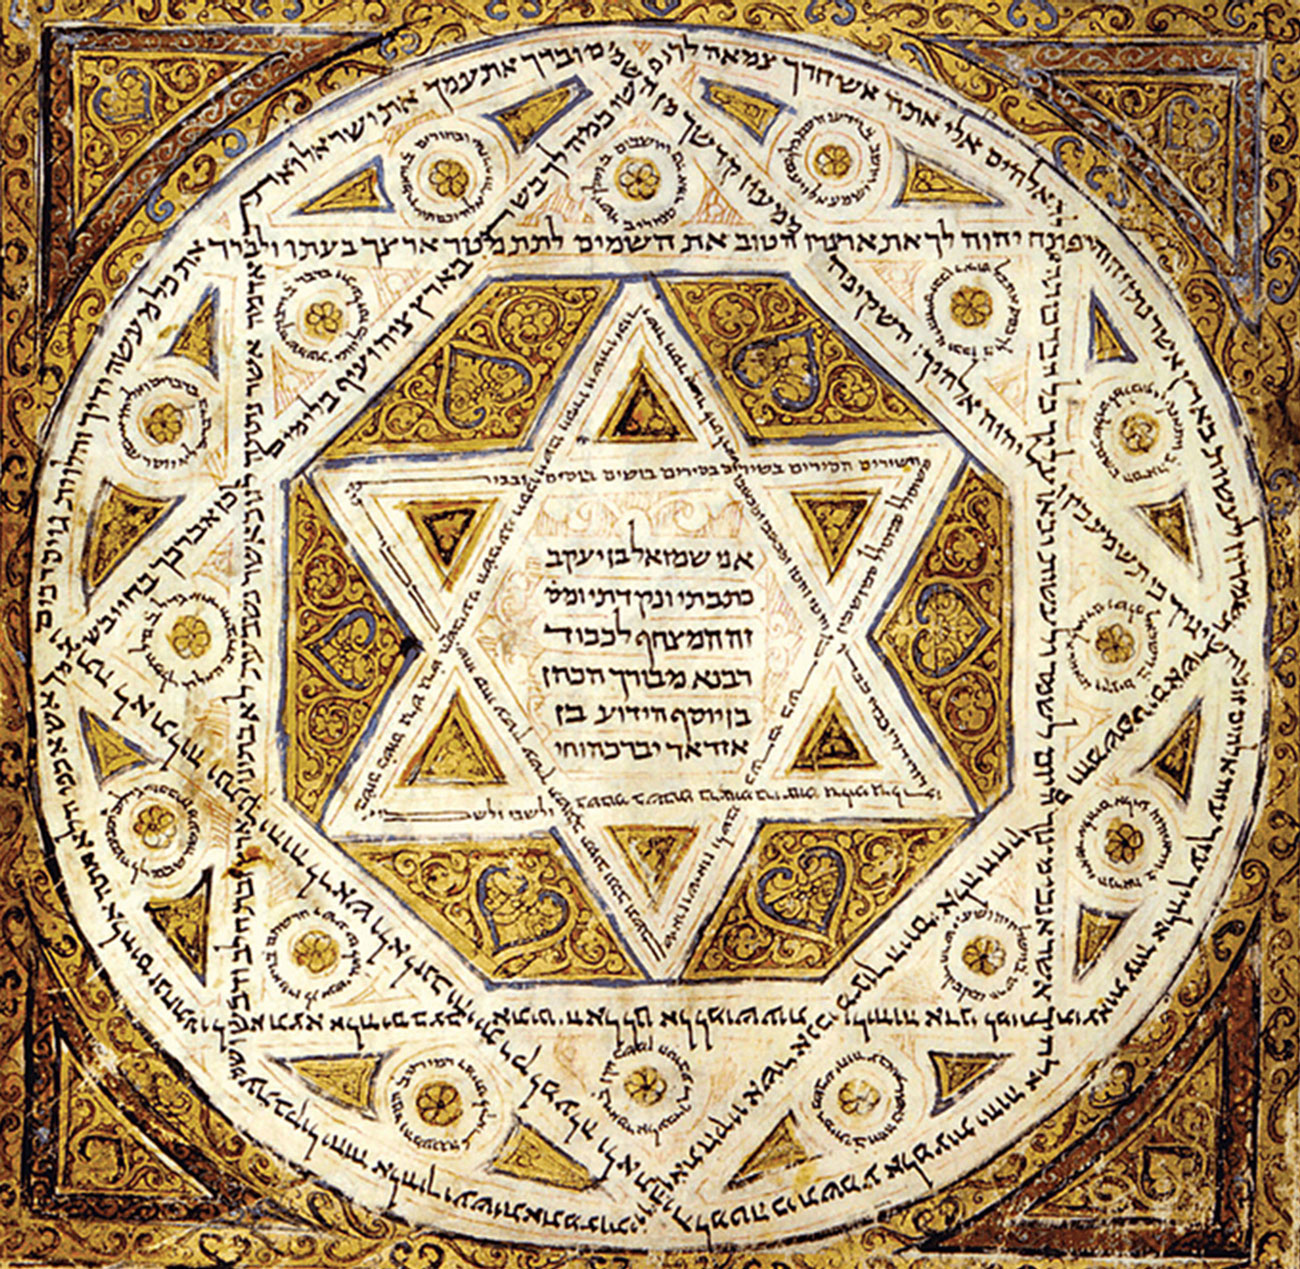 The Leningrad Codex from ten oh eight, one of the oldest examples of the complete Hebrew Bible. This page depicts a hexagram.